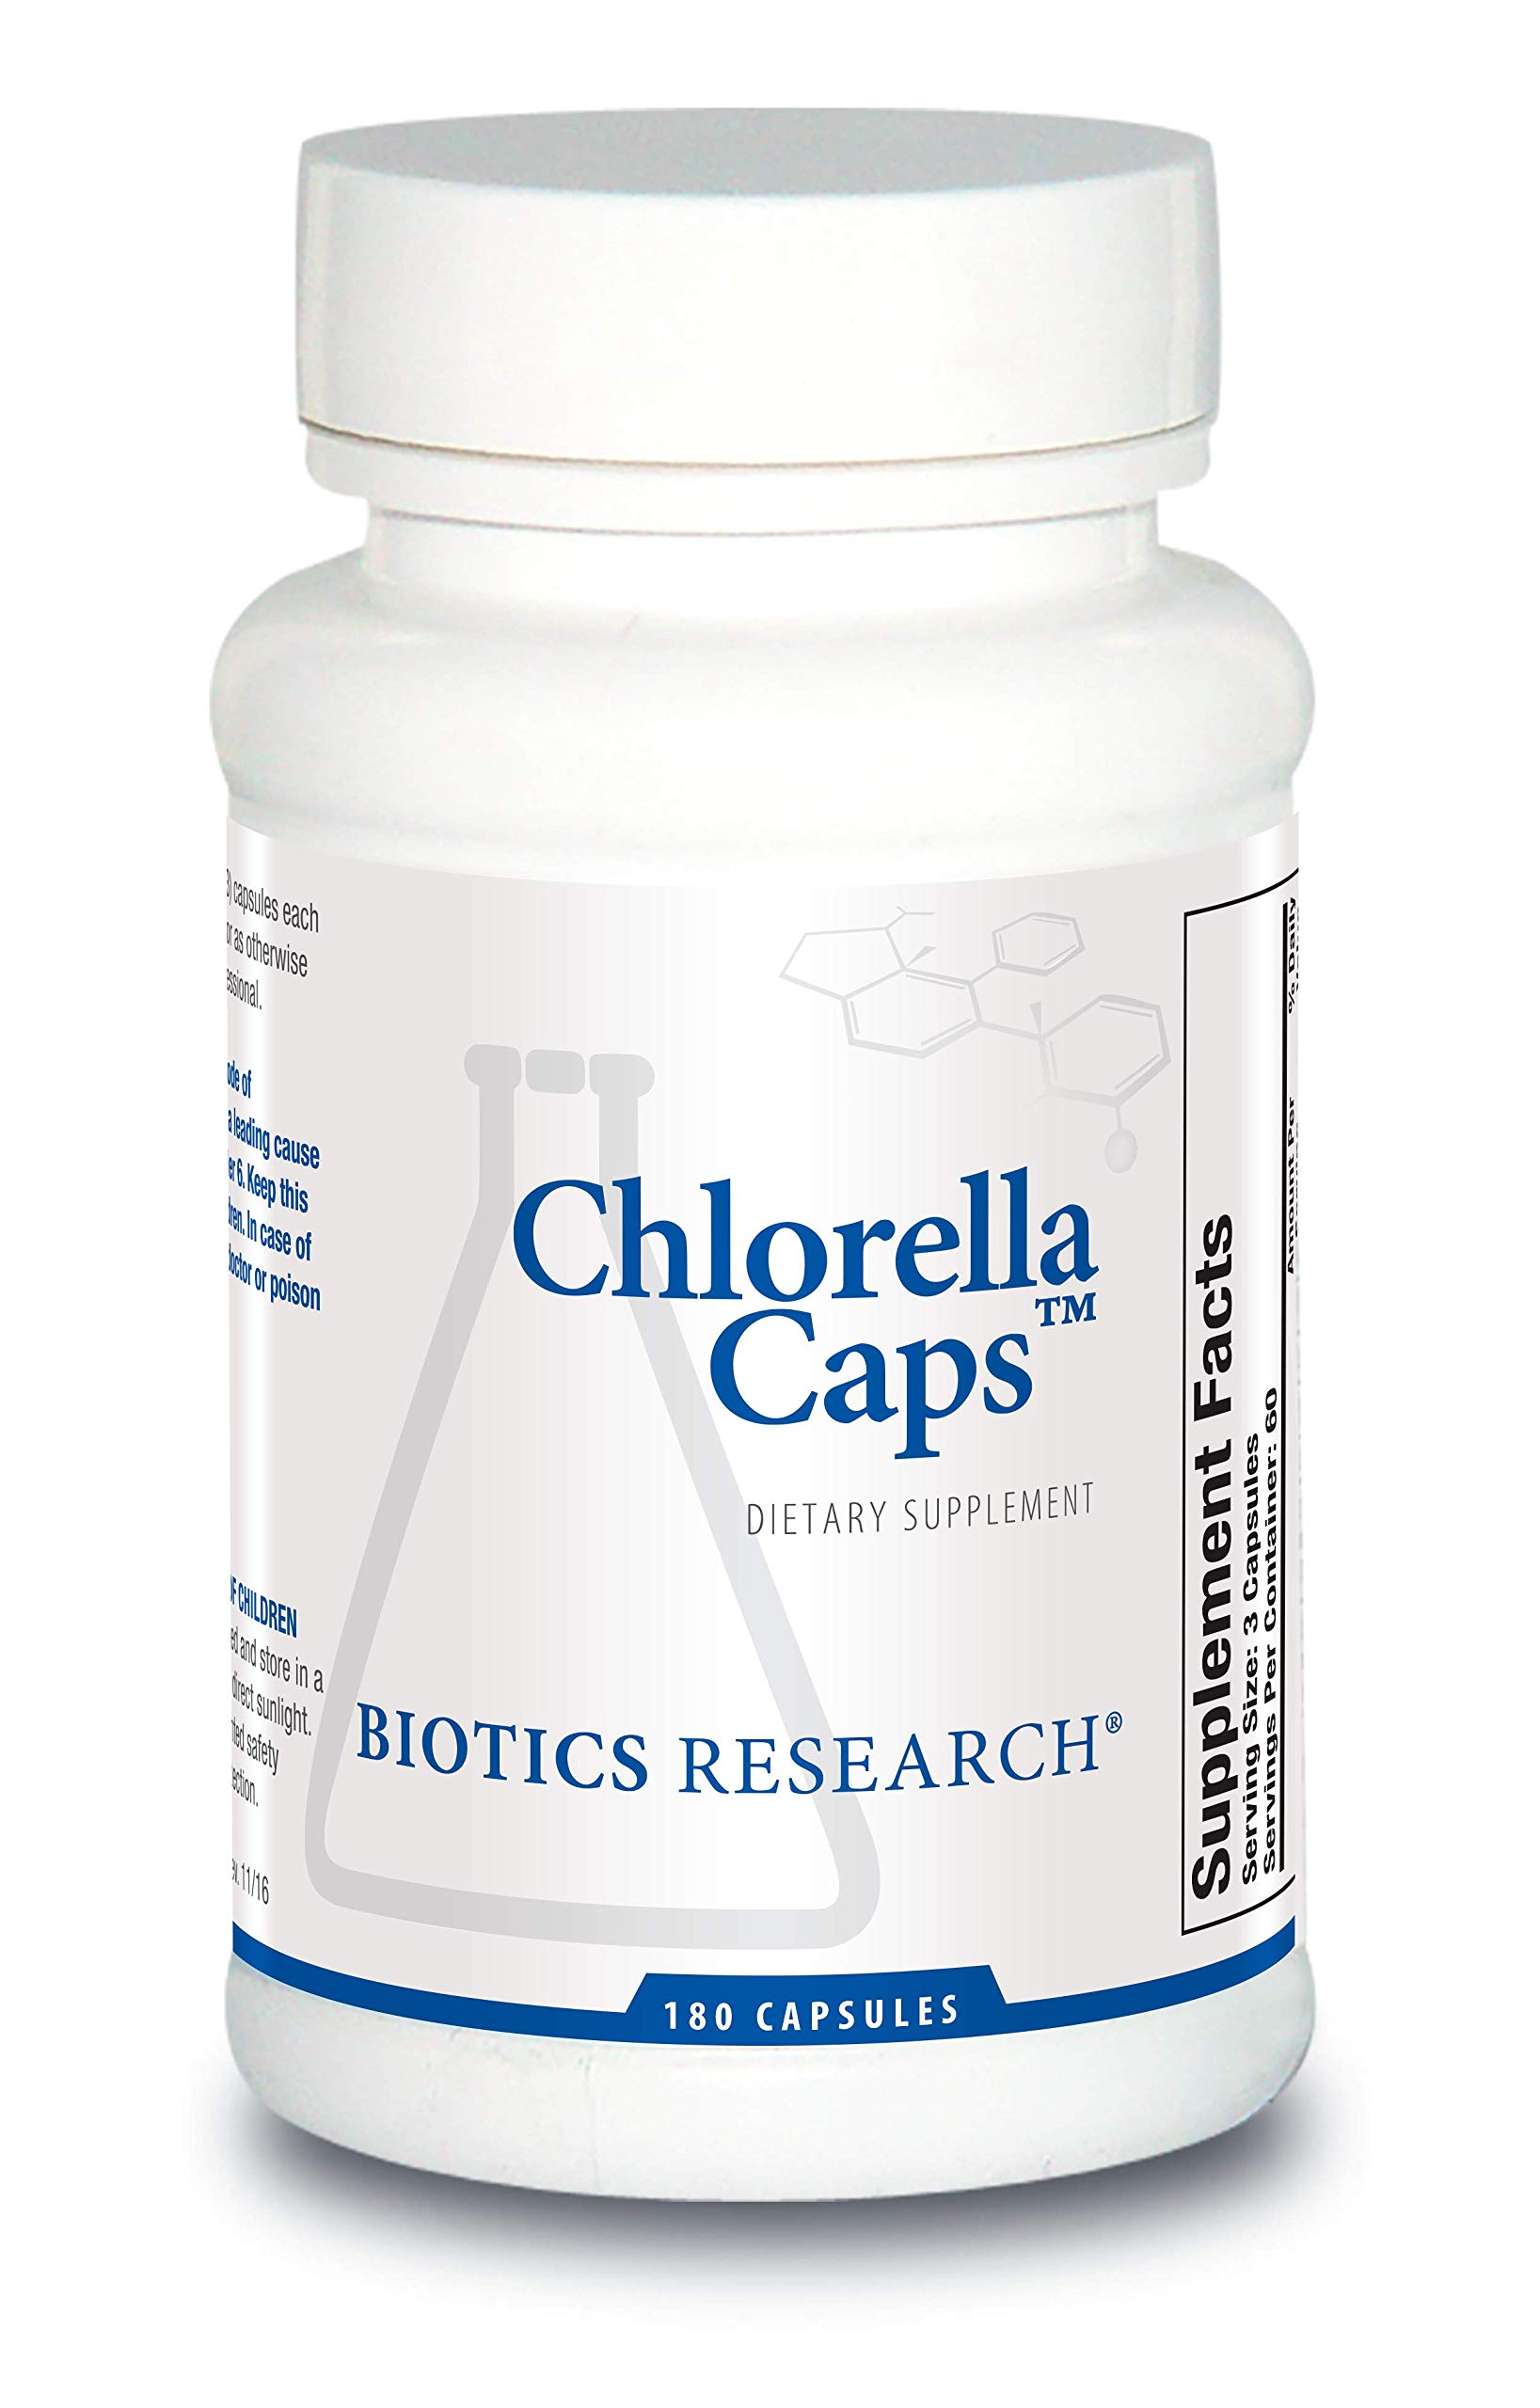 BIOTICS Research Chlorella Capsules Chlorella Supplements for Digestion, Detox, and Immune Support 180 Capsules